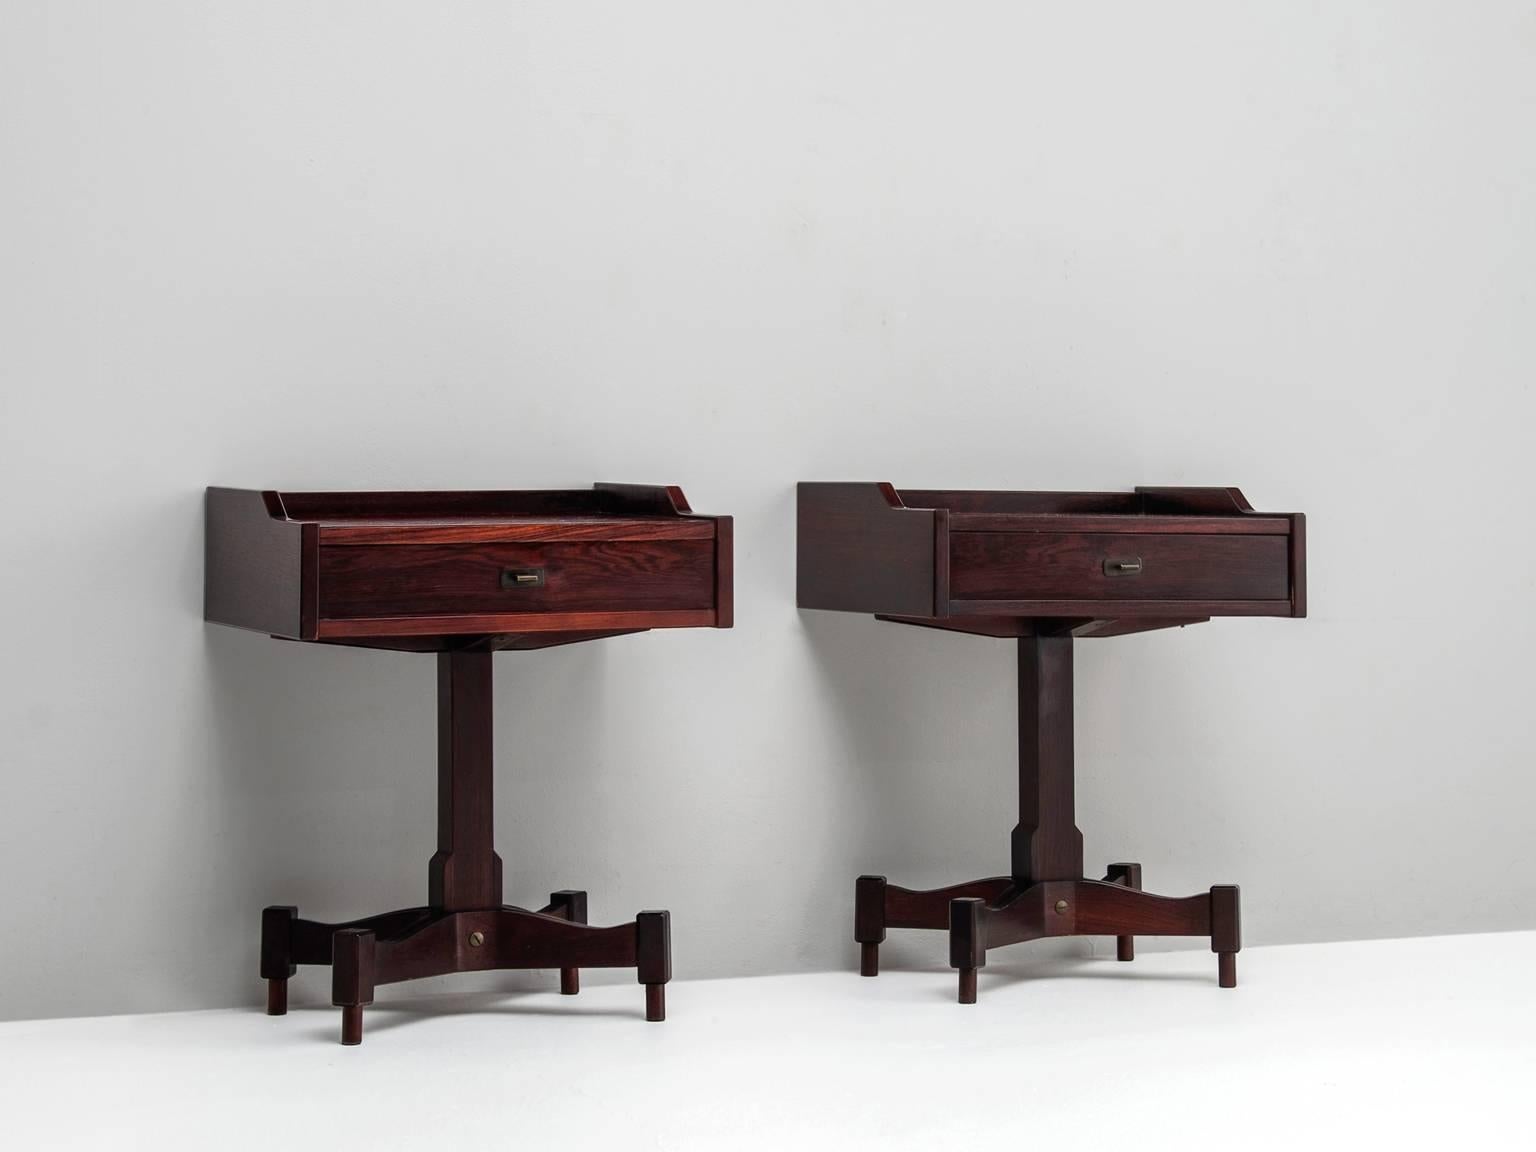 Pair of rosewood nightstands model SC 50, in rosewood and brass, by Claudio Salocchi for Sormani, Italy 1962.

Architectural pair of side tables. The typical expressive highly detailed base certainly provide an elegant touch. The table and drawer